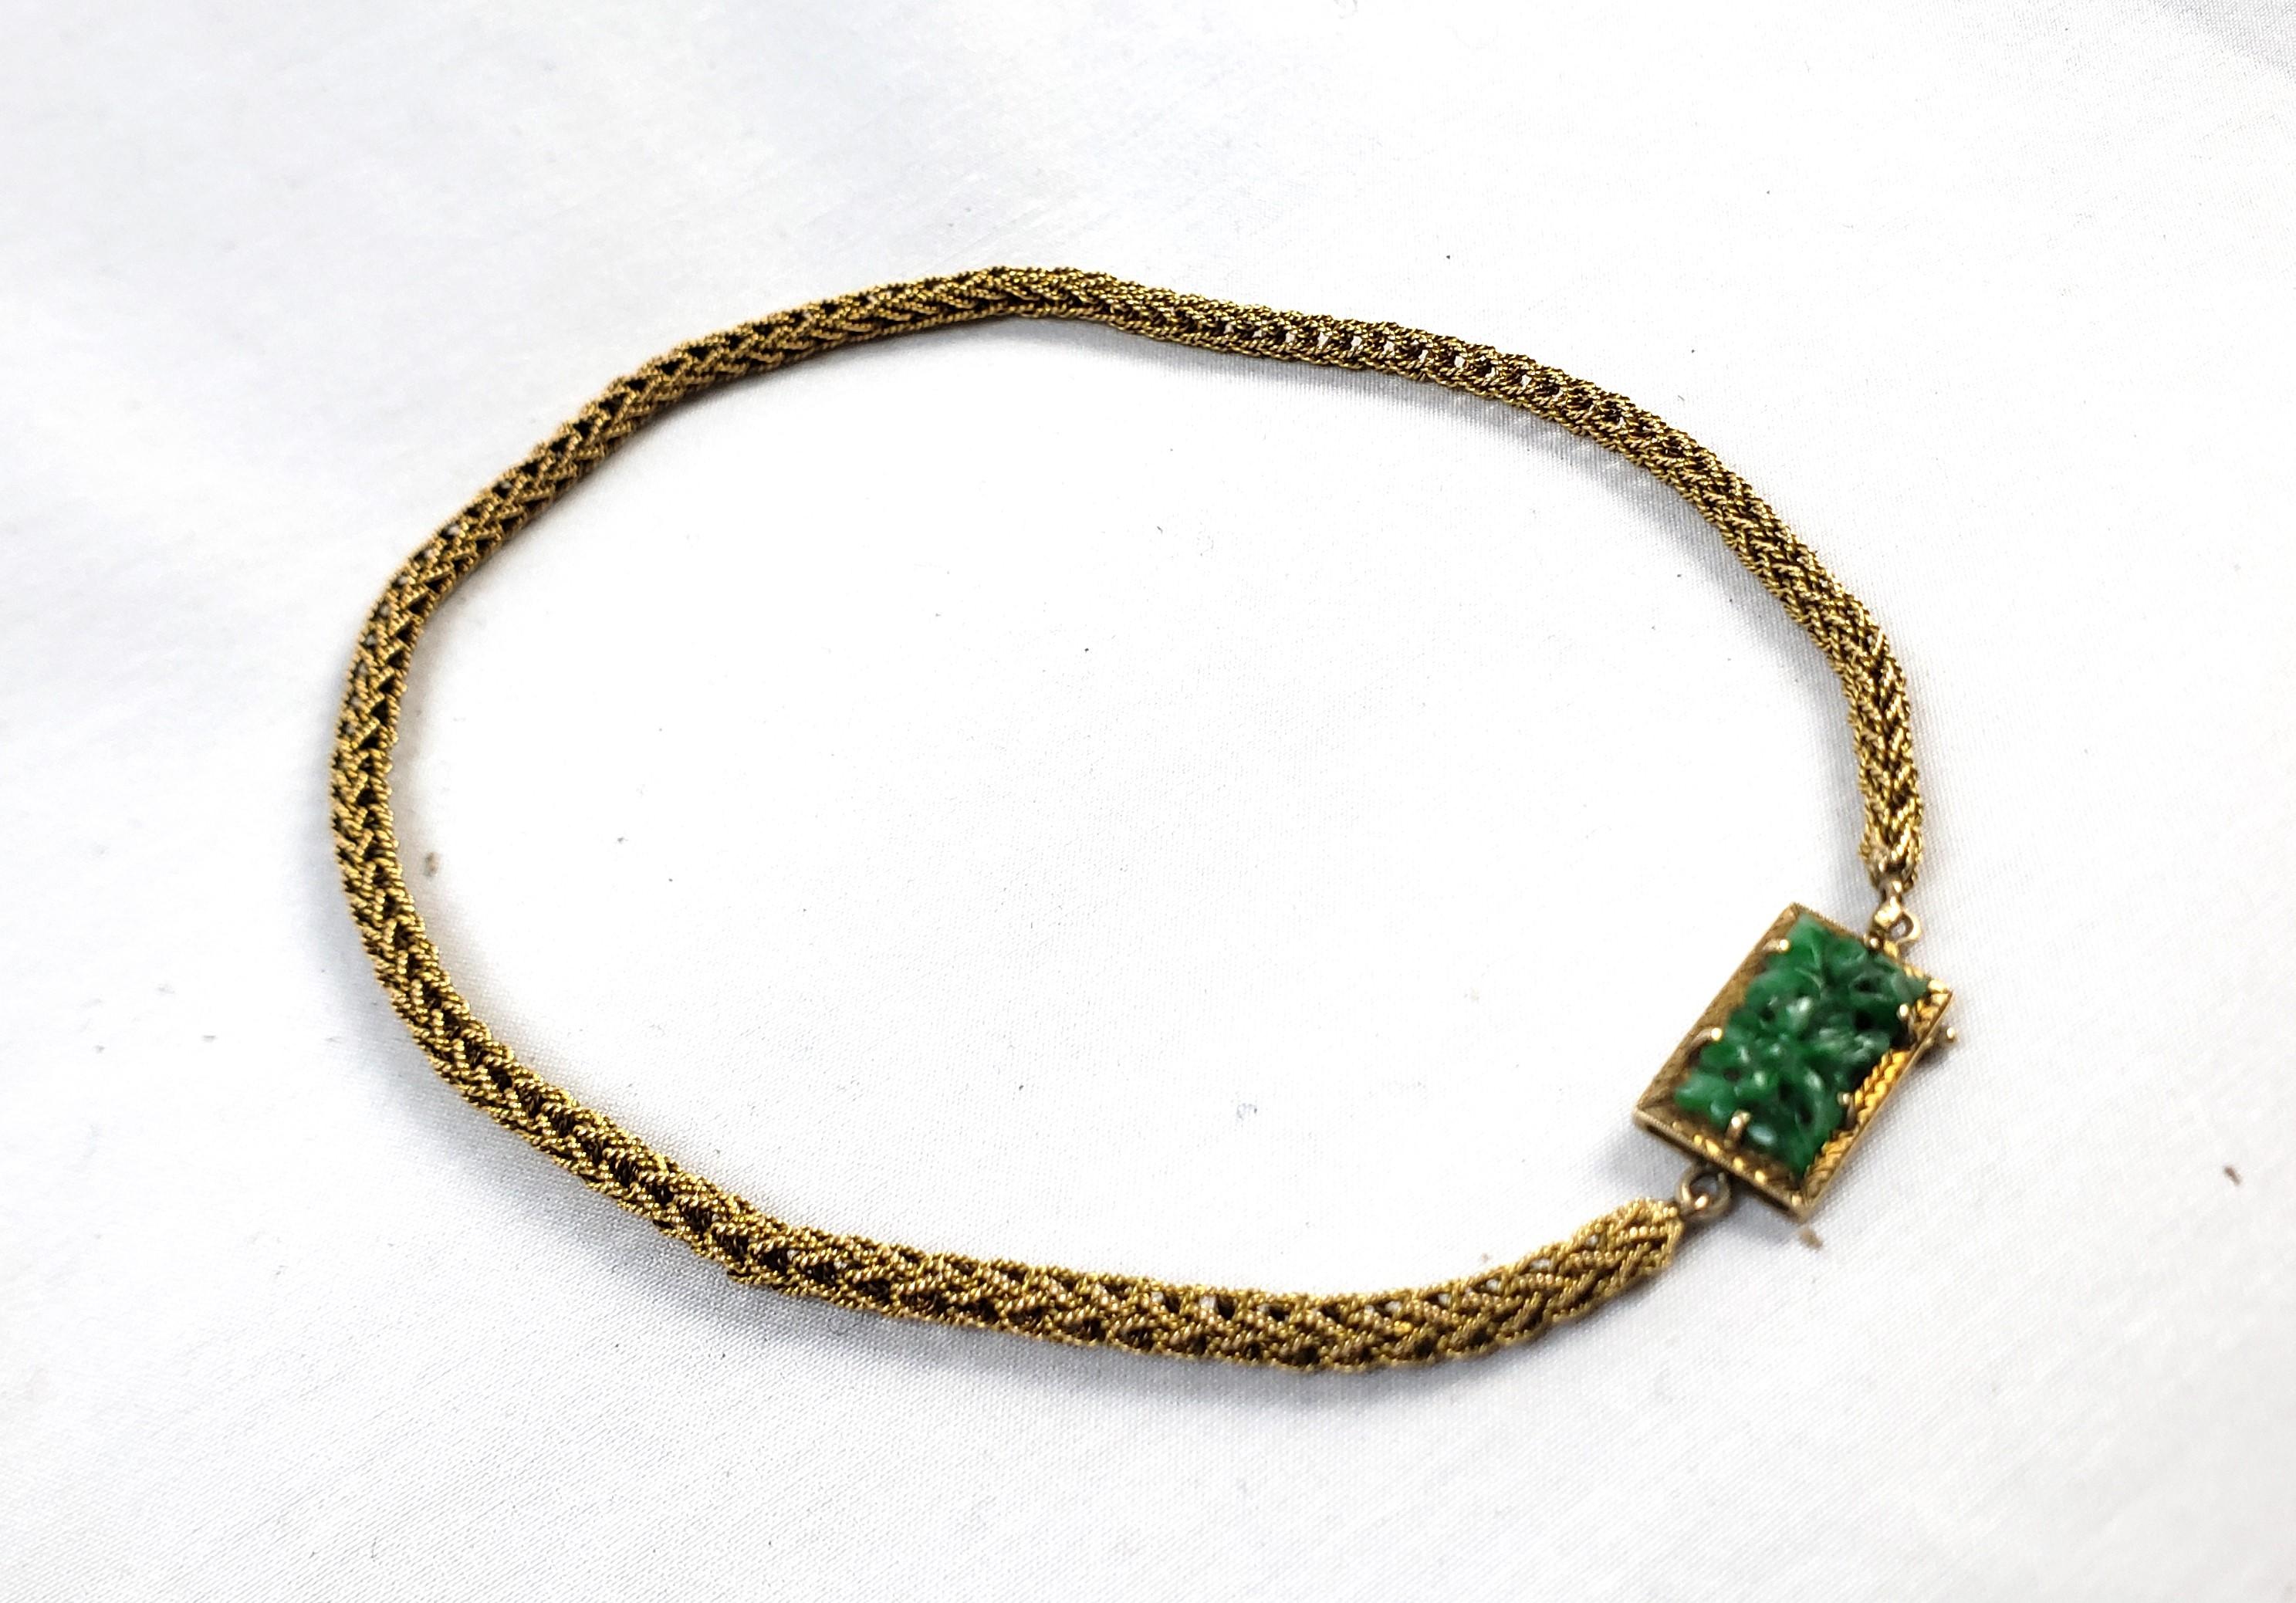 This antique women's necklace is unsigned and unmarked but dates to approximately 1900 and presumed to originate from China and done in a period Chinoiserie style. The necklace is composed of 14 karat yellow gold with a thick robe chain and features